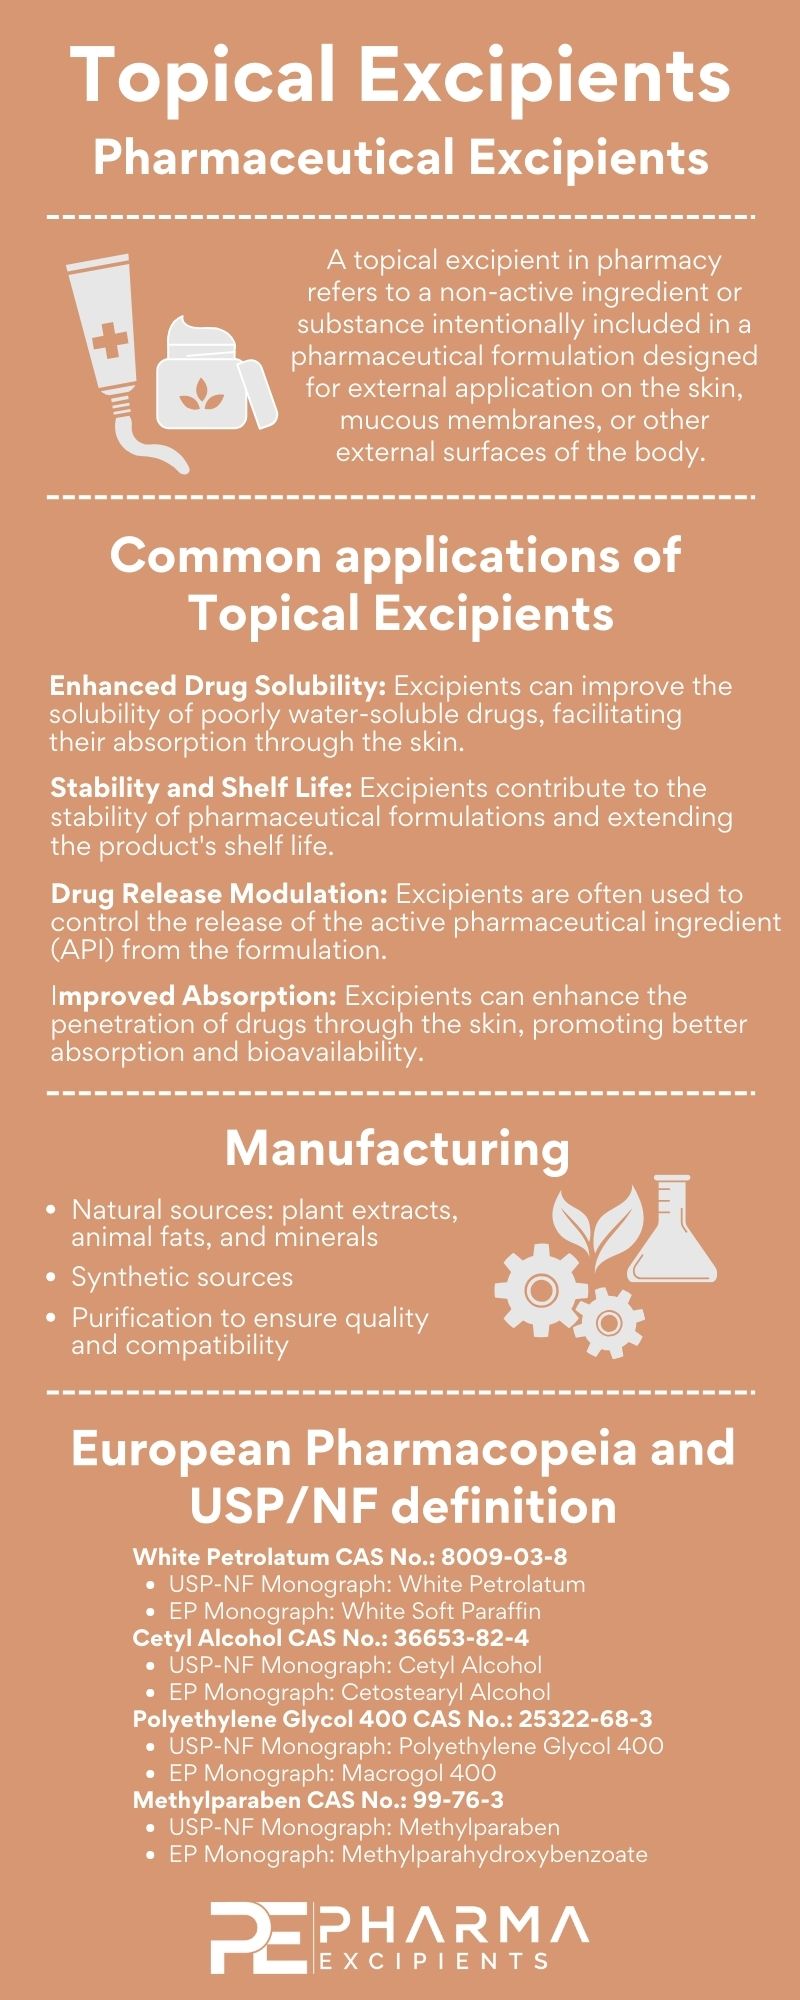 Topical Excipients Infographic